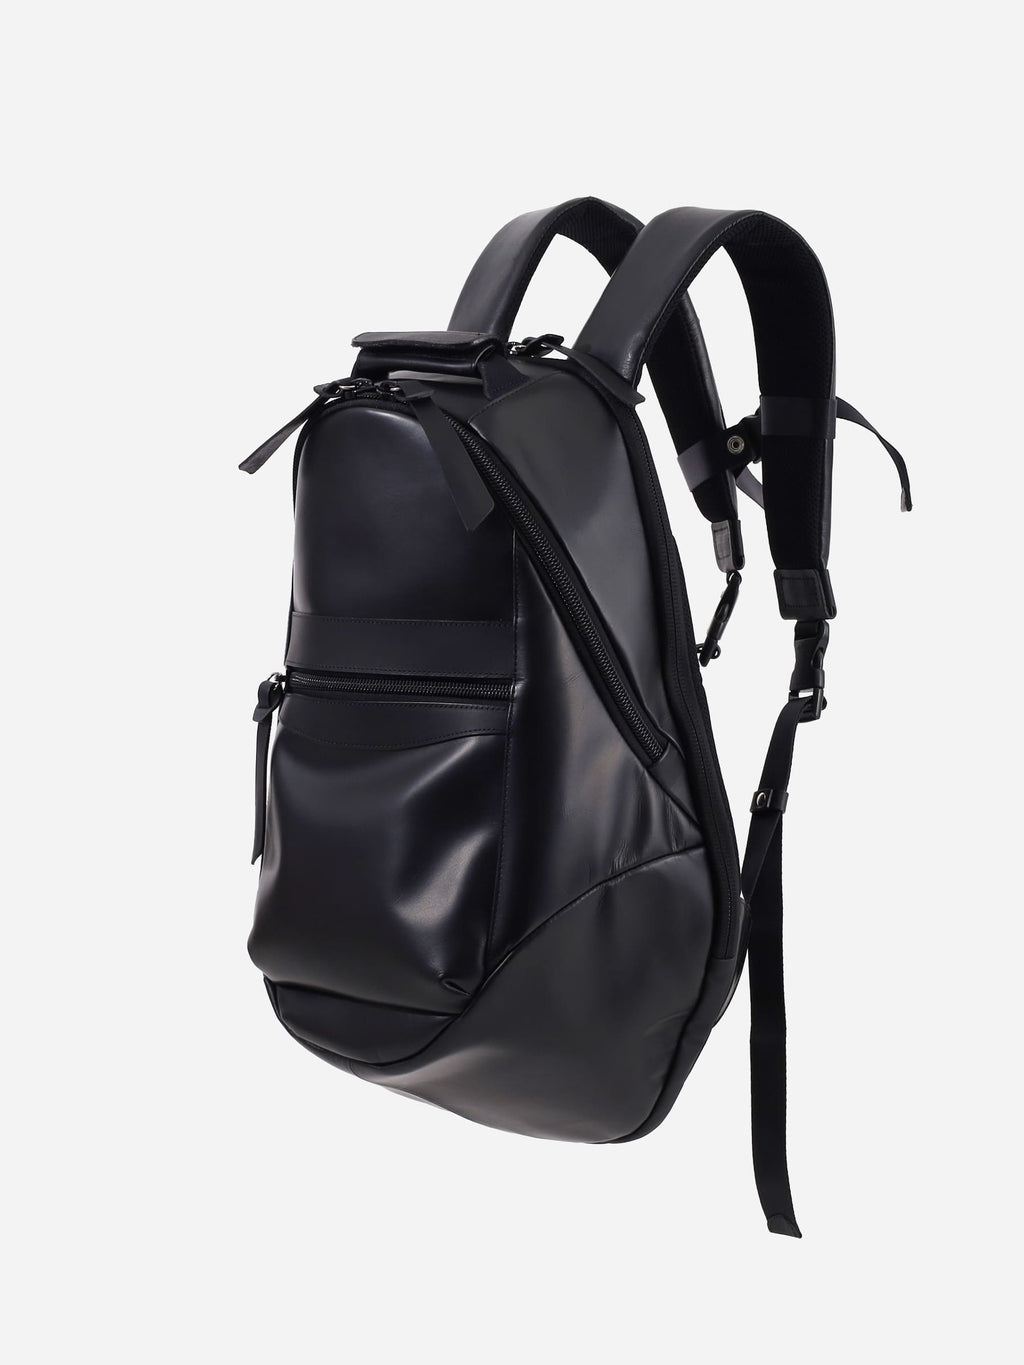 PACK-4 leather backpack (for 16inch pc) ビジネスシーンにも合わせ 